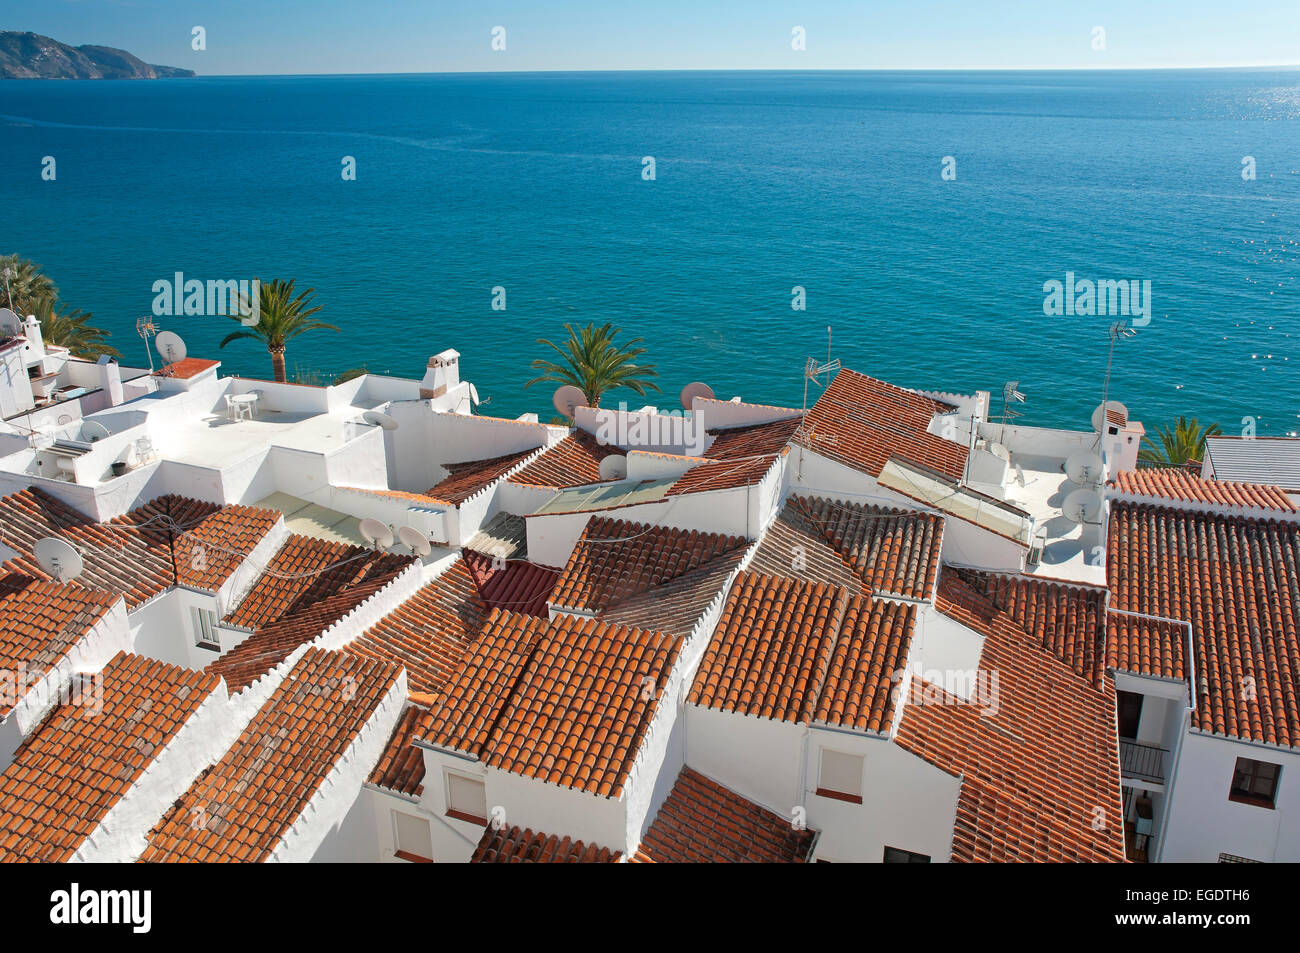 View of the village, Nerja, Malaga province, Region of Andalusia, Spain, Europe Stock Photo